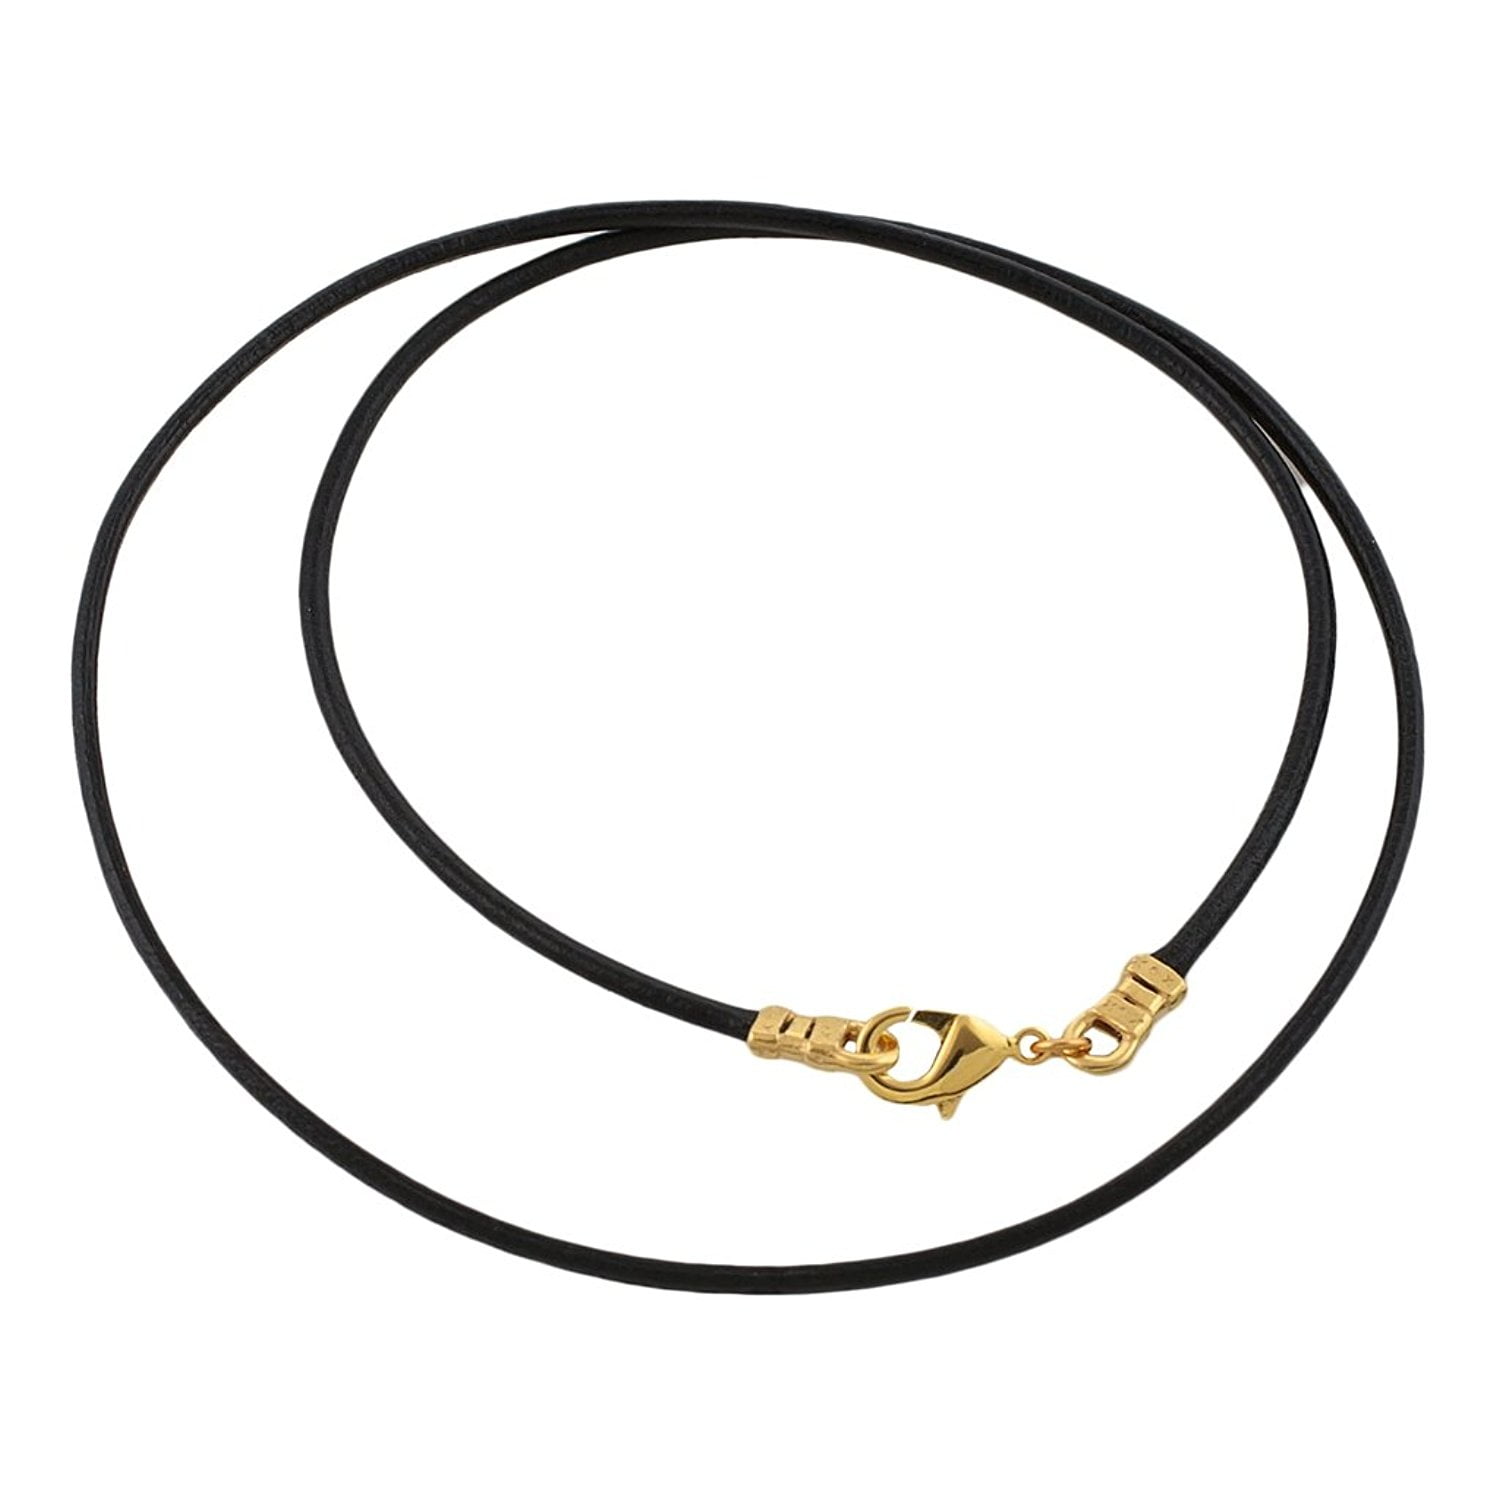 DragonWeave Extra Thick 5mm Wide Black Leather Cord Silver Plated Mens Necklace Any Length